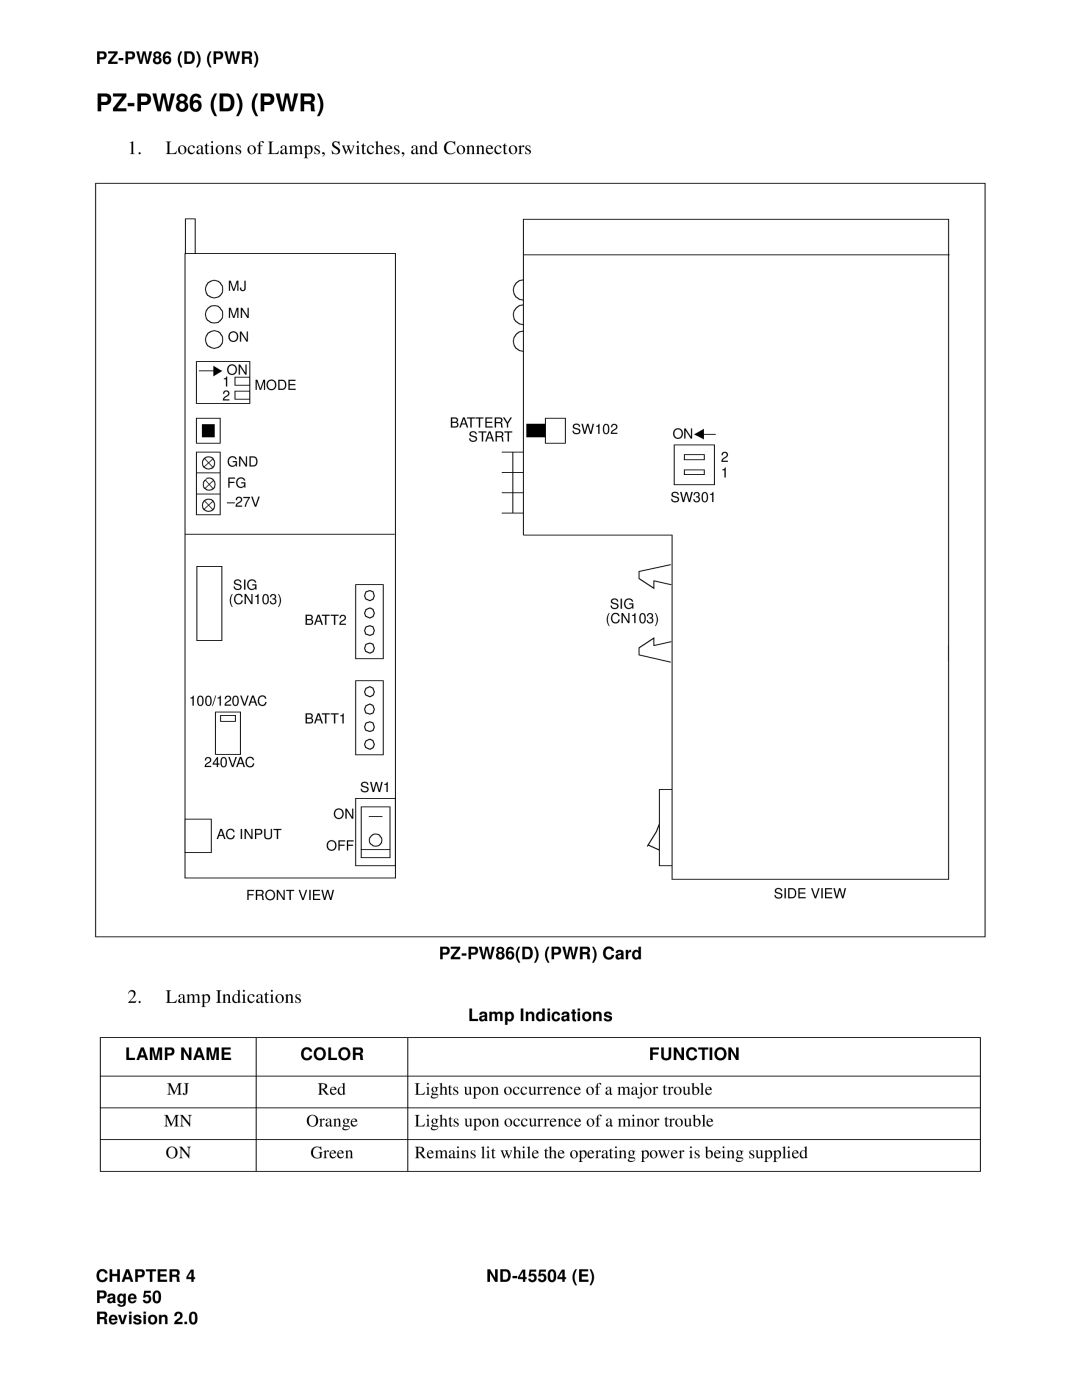 NEC 2000 IVS PZ-PW86D PWR, Locations of Lamps, Switches, and Connectors, Lamp Indications, PZ-PW86DPWR Card, Lamp Name 